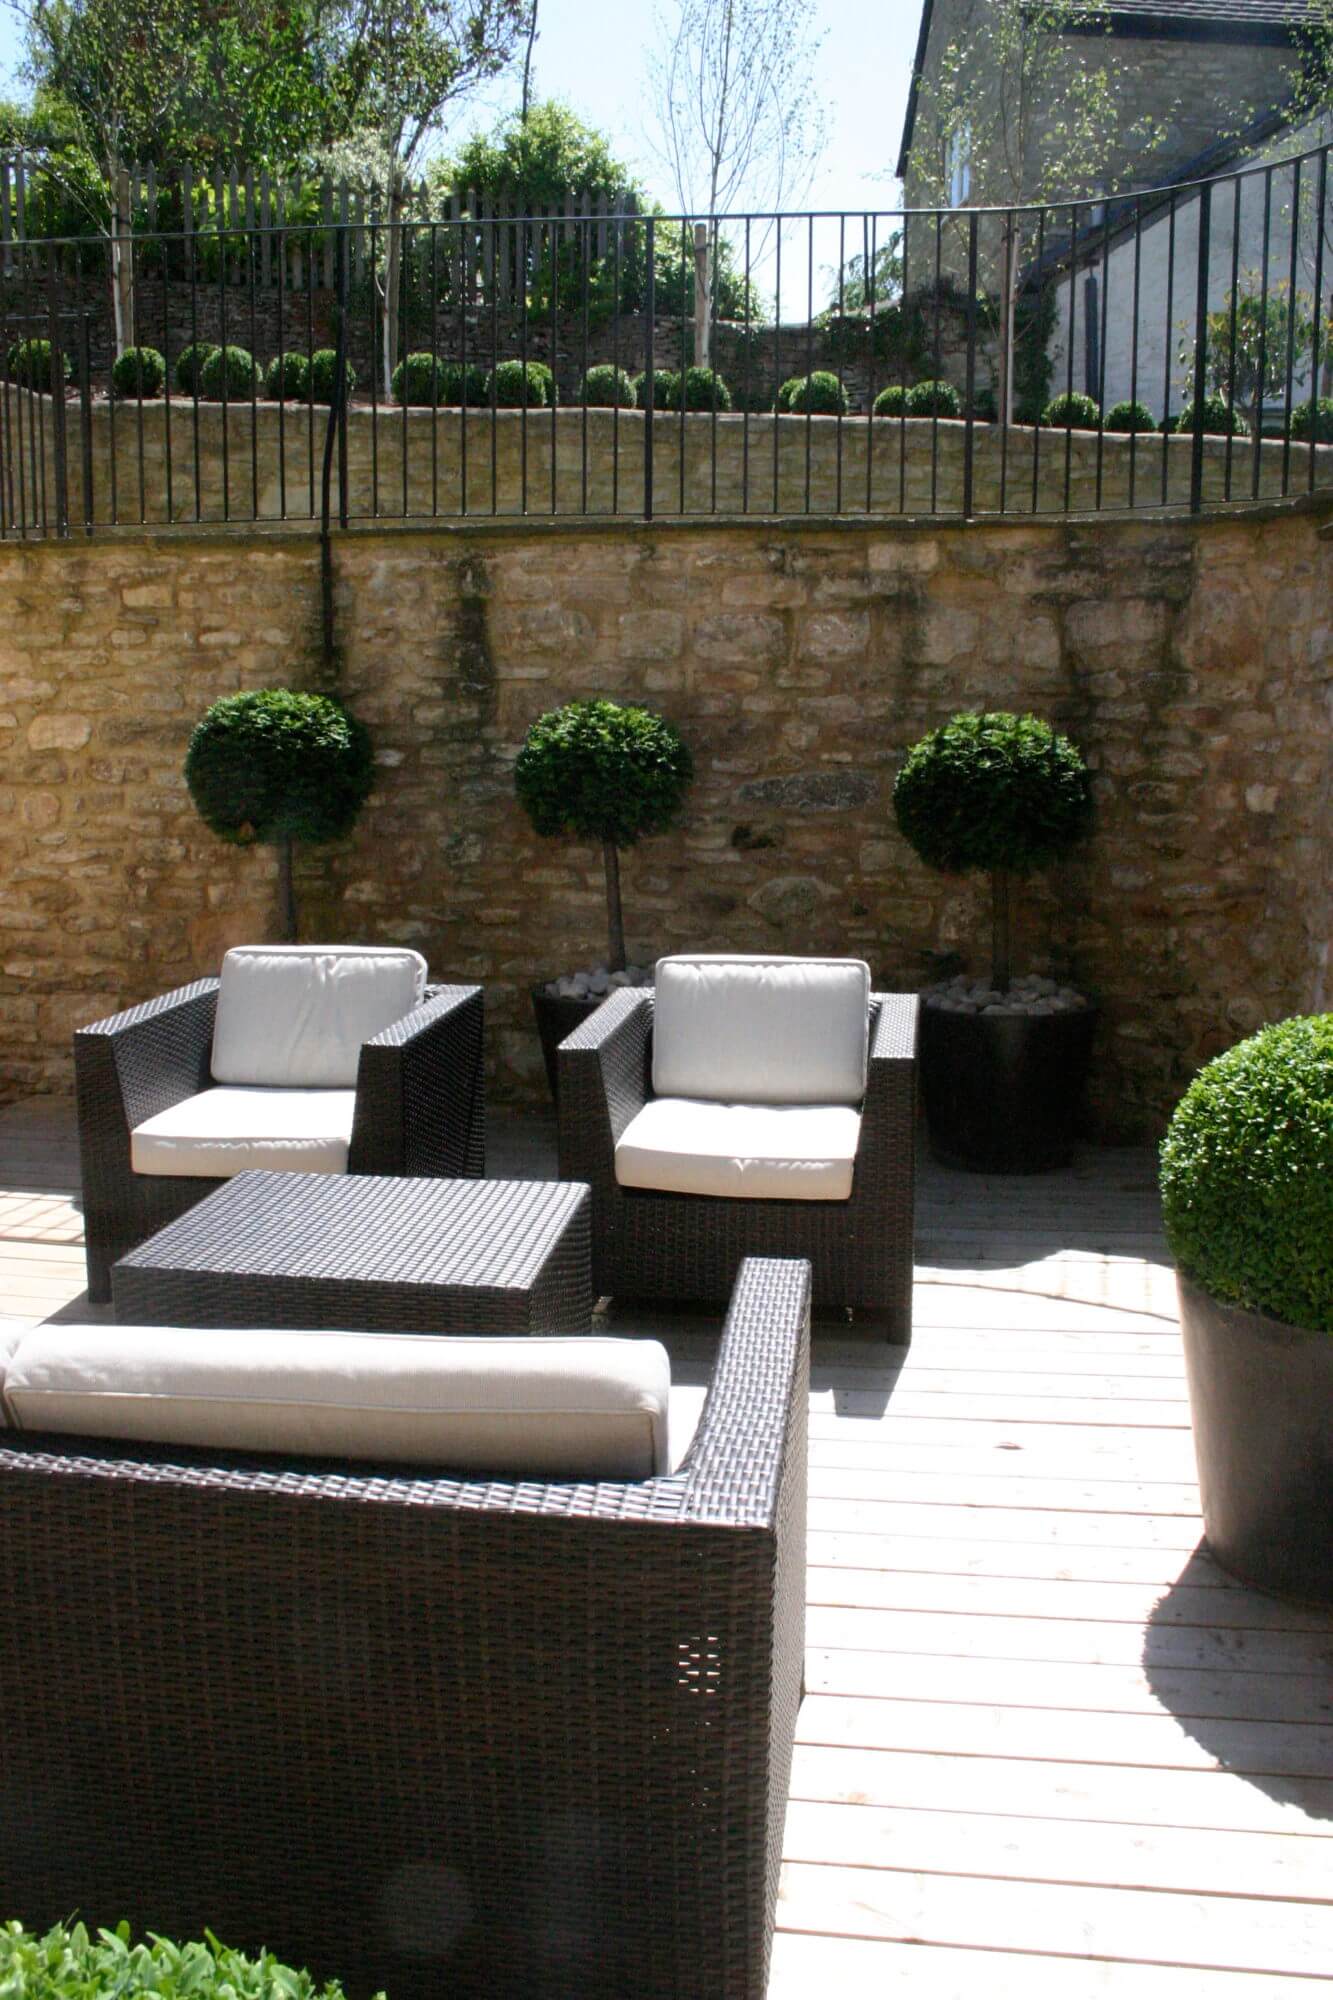 Garden seats with topiary balls